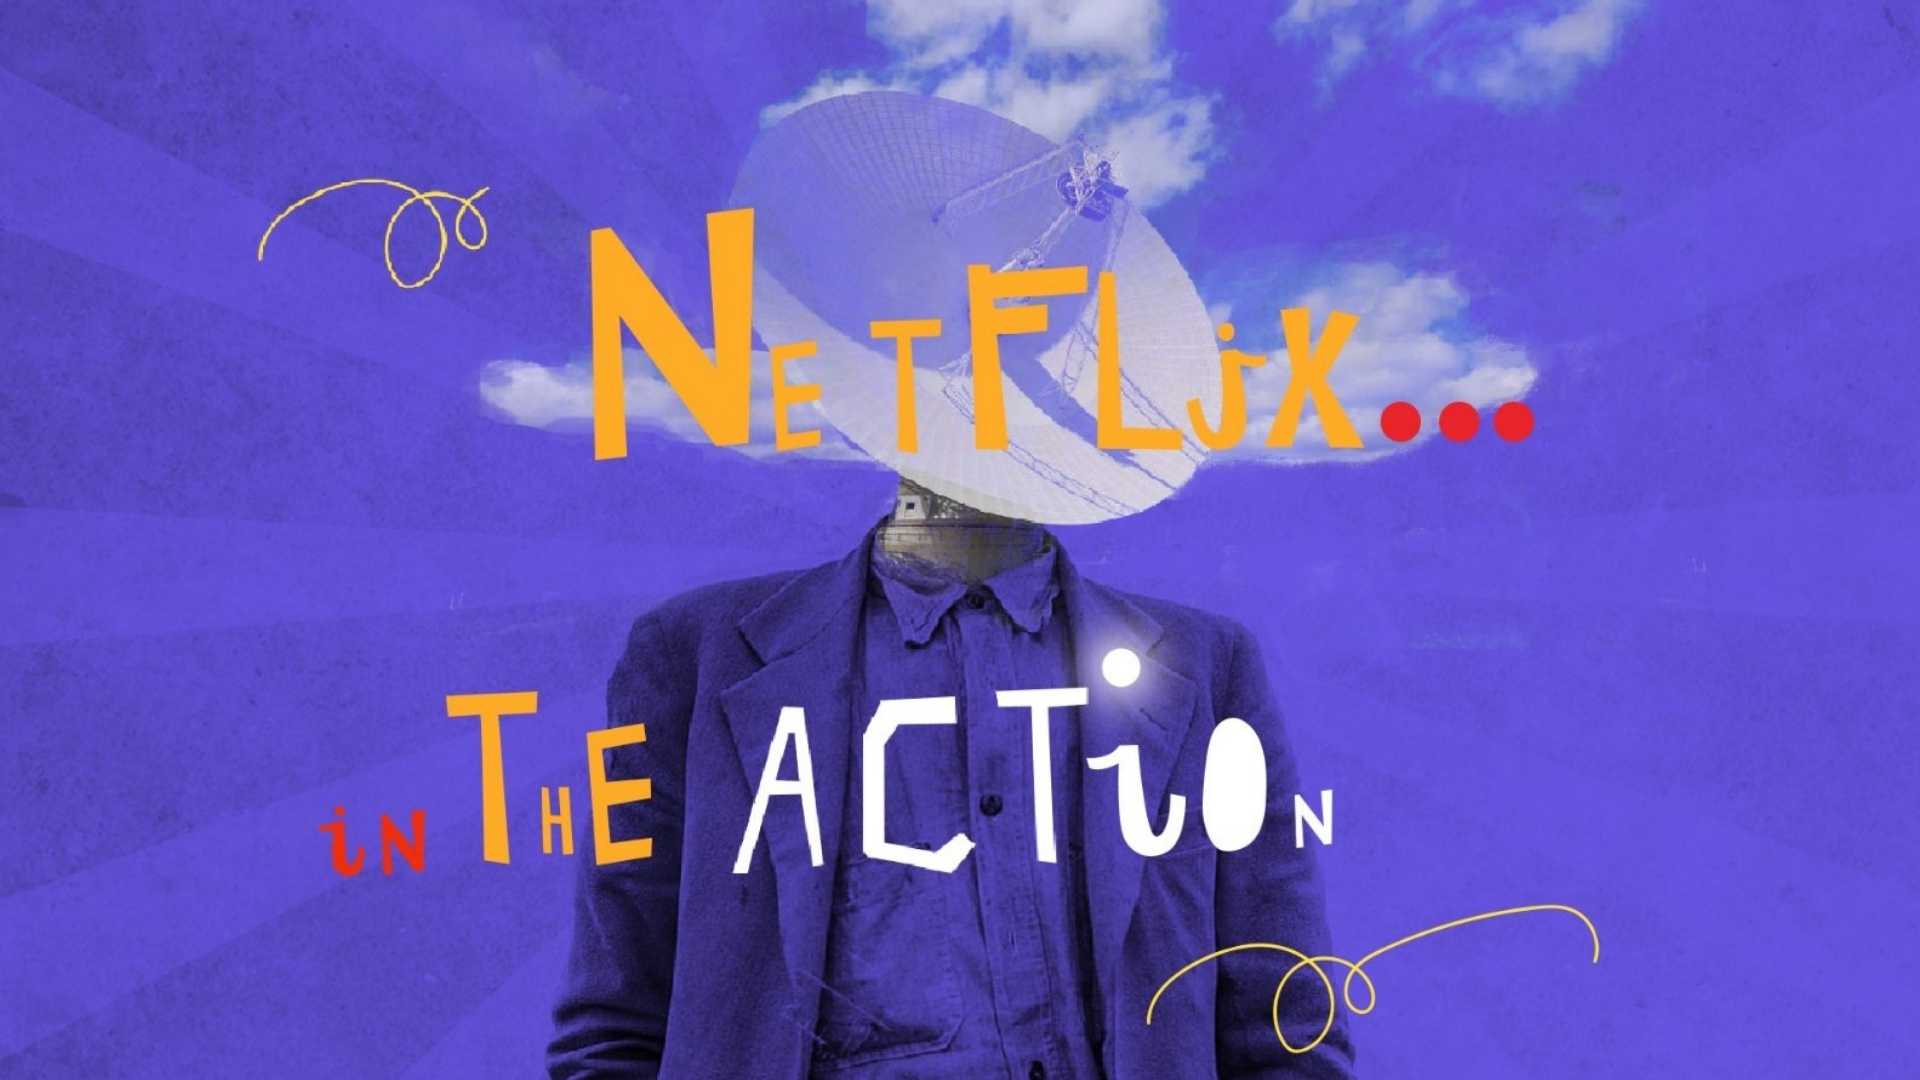 Netflix aNetflix animation in actionnimation in action